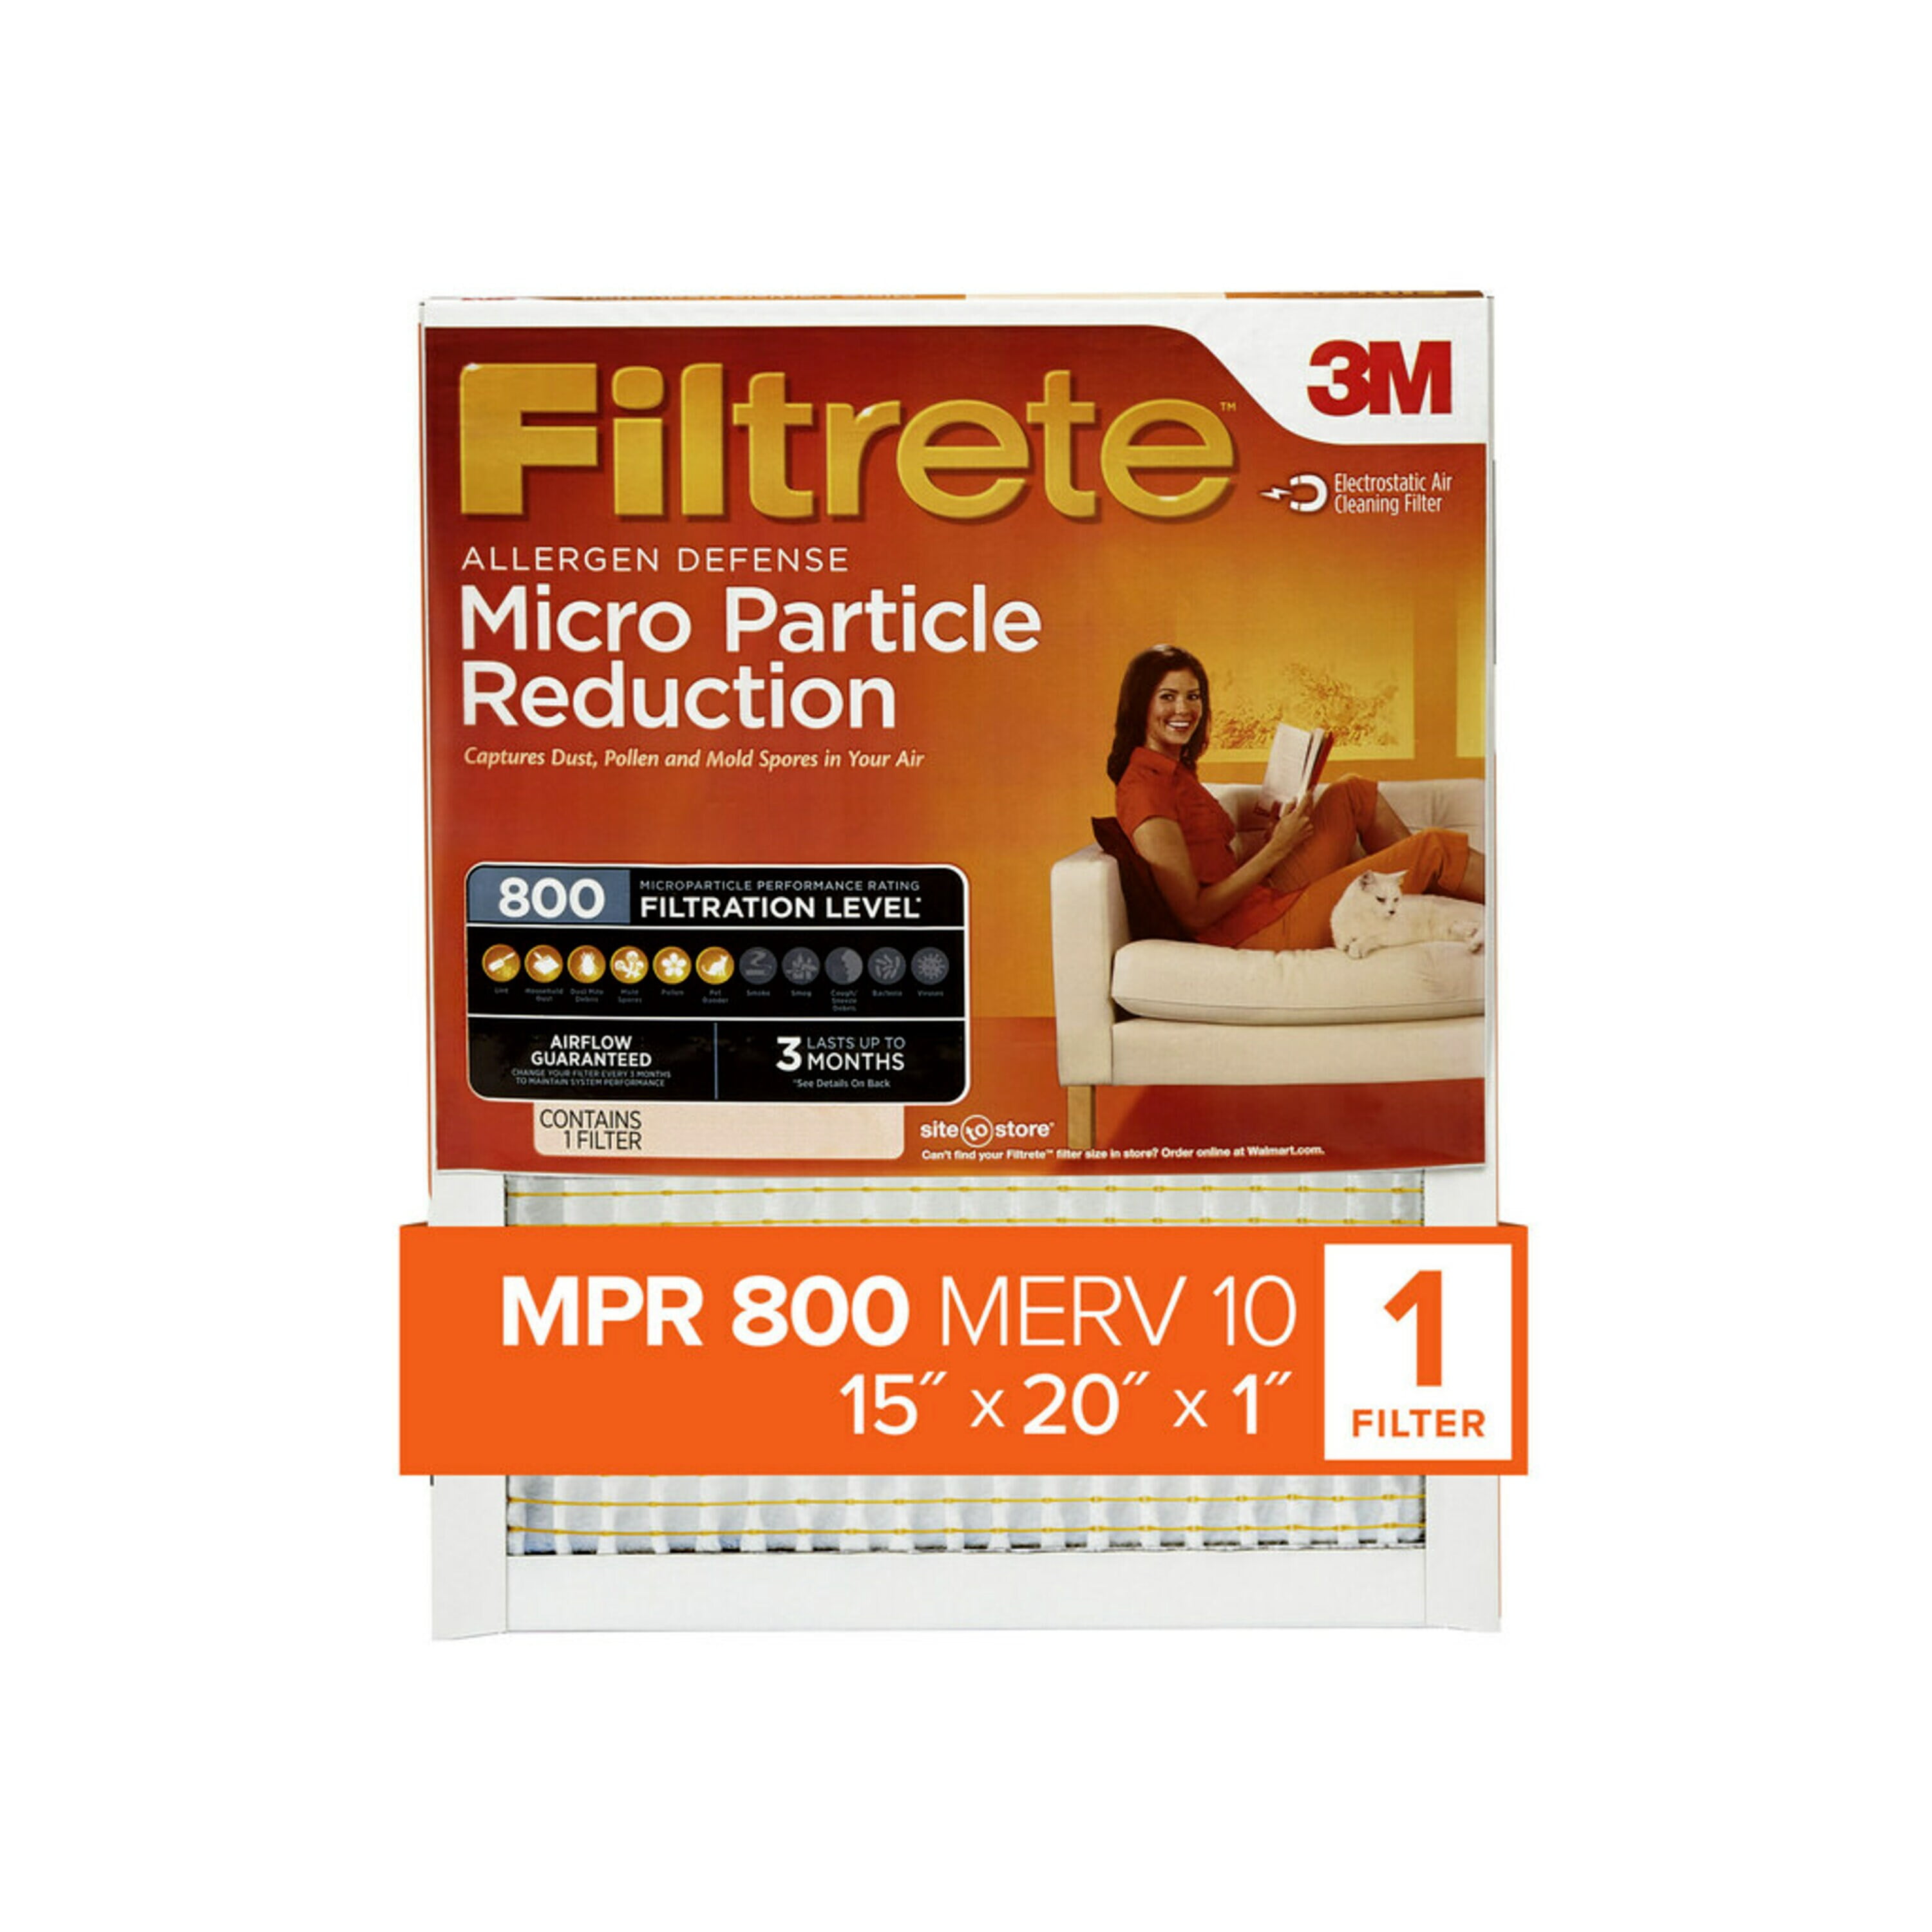 Filtrete by 3M 15x20x1, MERV 10, Micro Particle Reduction HVAC Furnace Air Filter, 800 MPR, 1 Filter